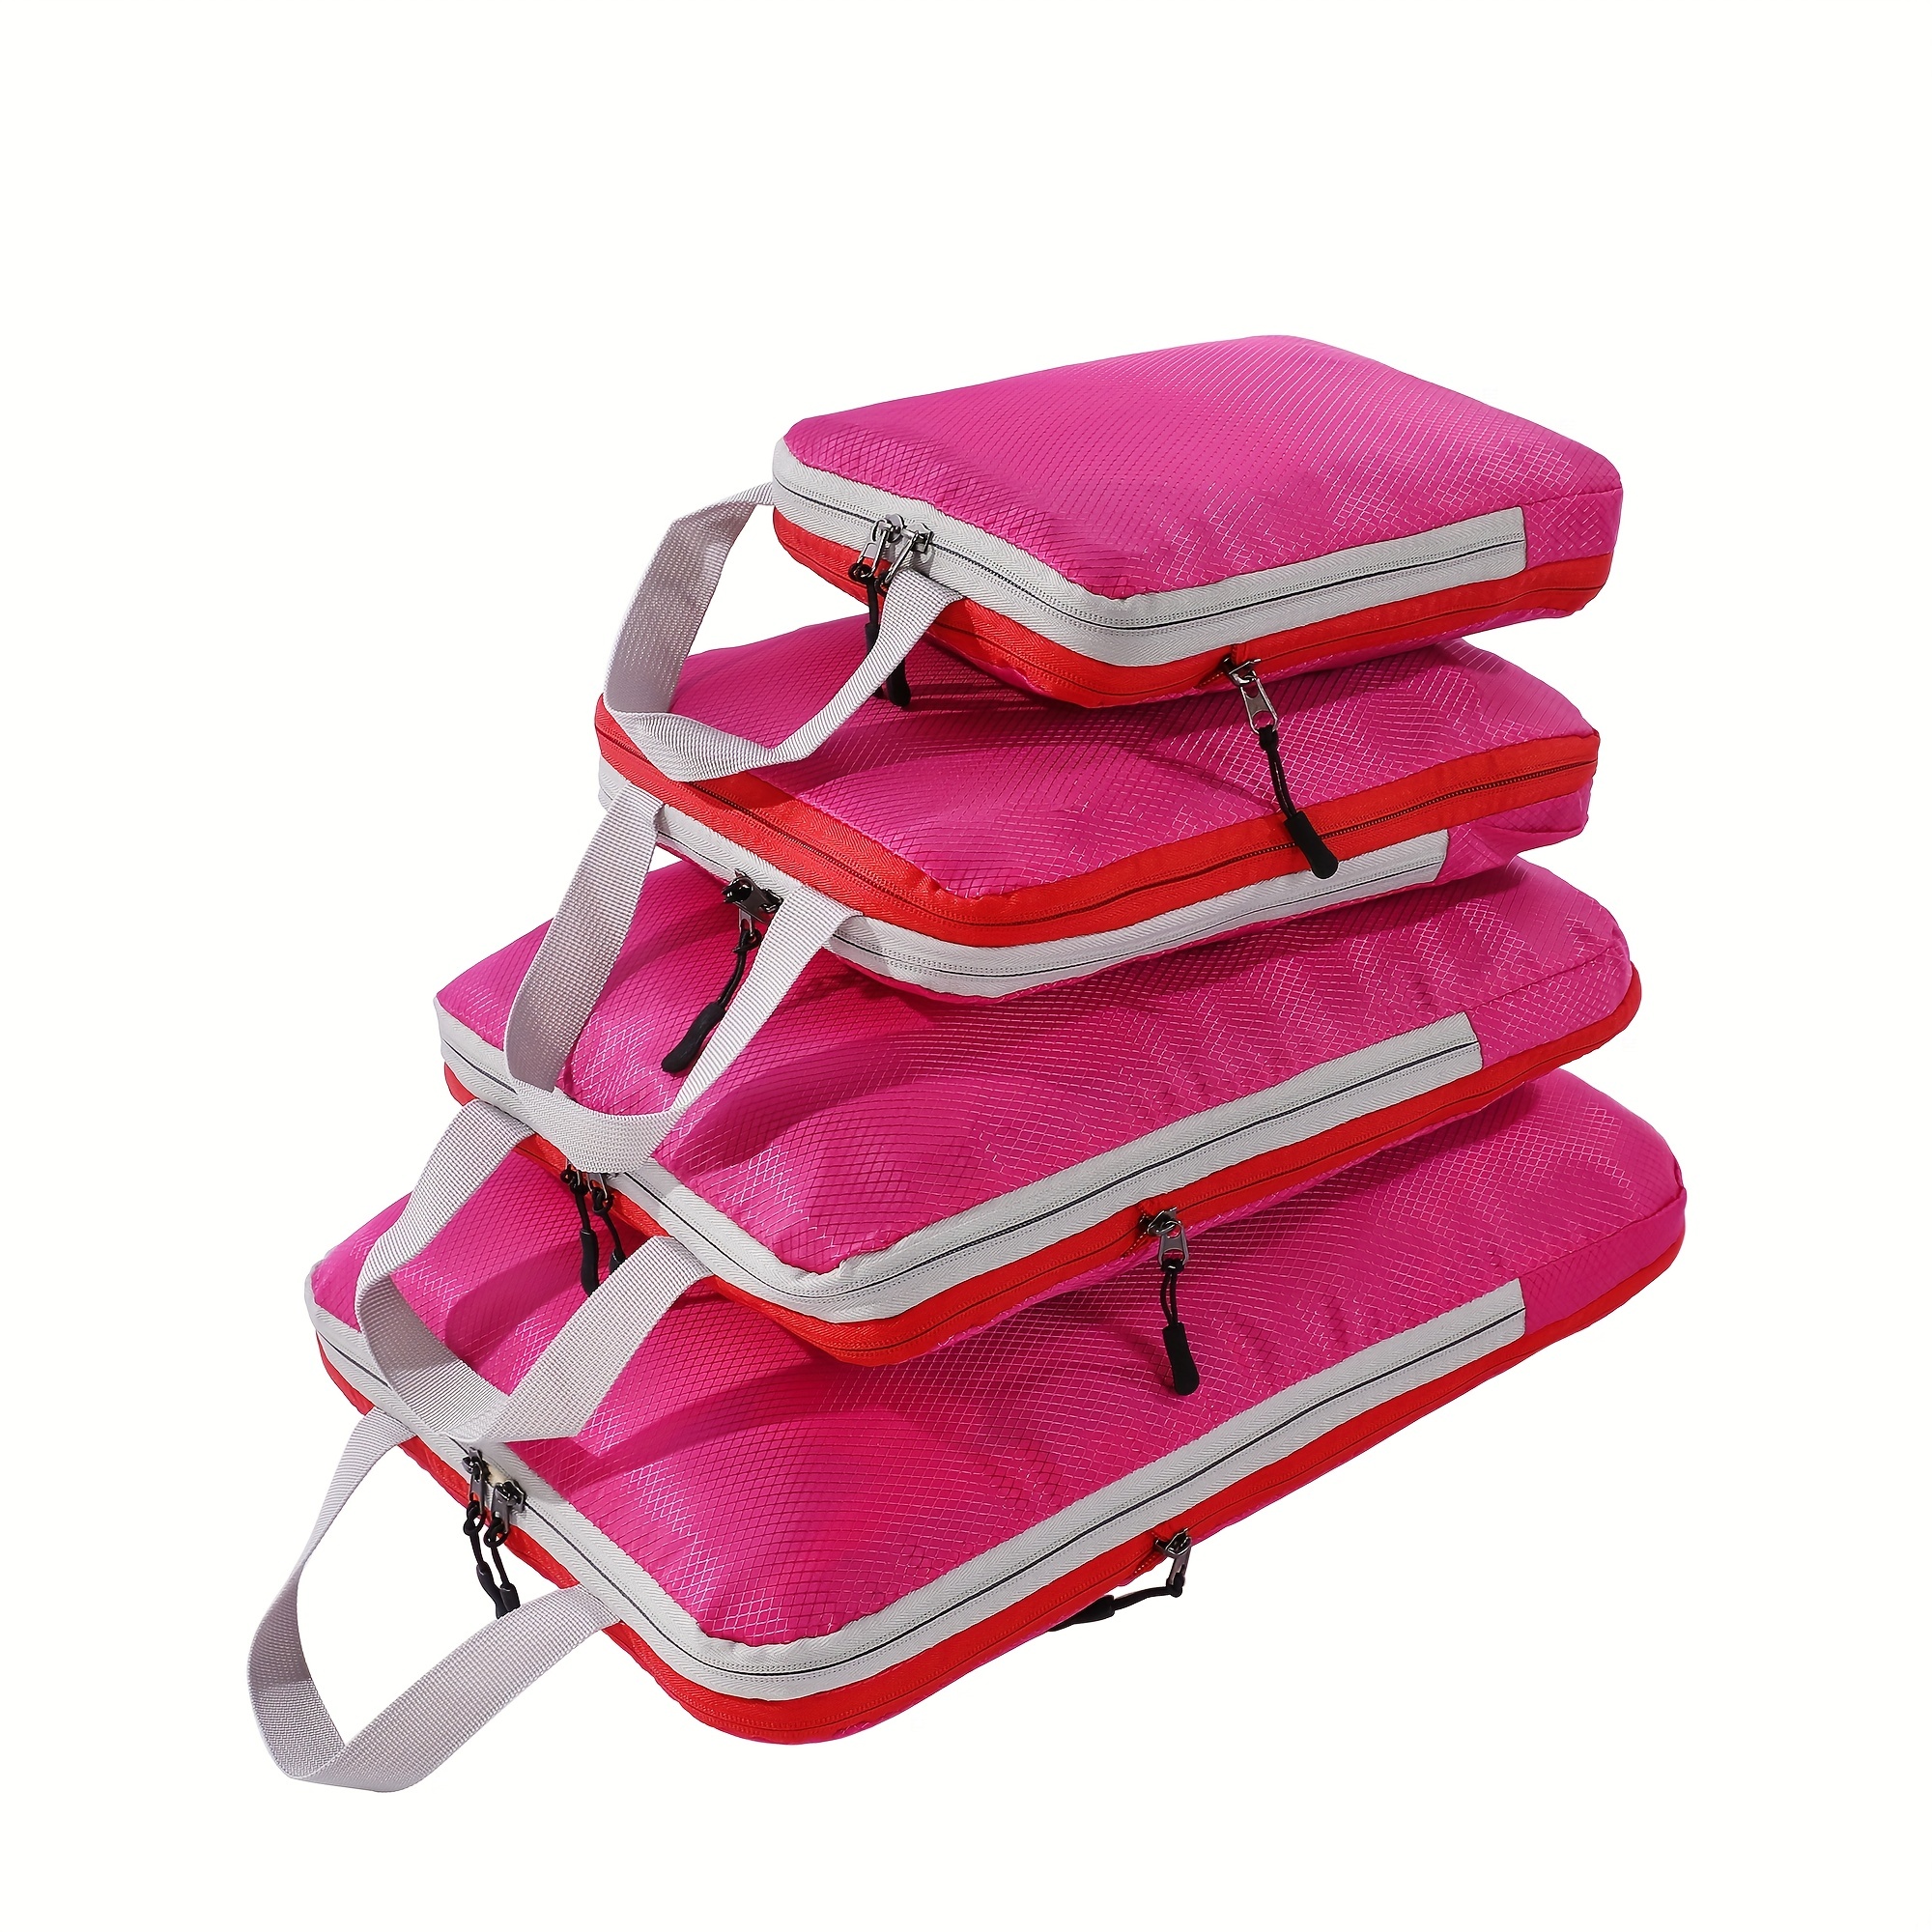 Packing Cube Set of 3 for Travel, Compression Bags Organizer for